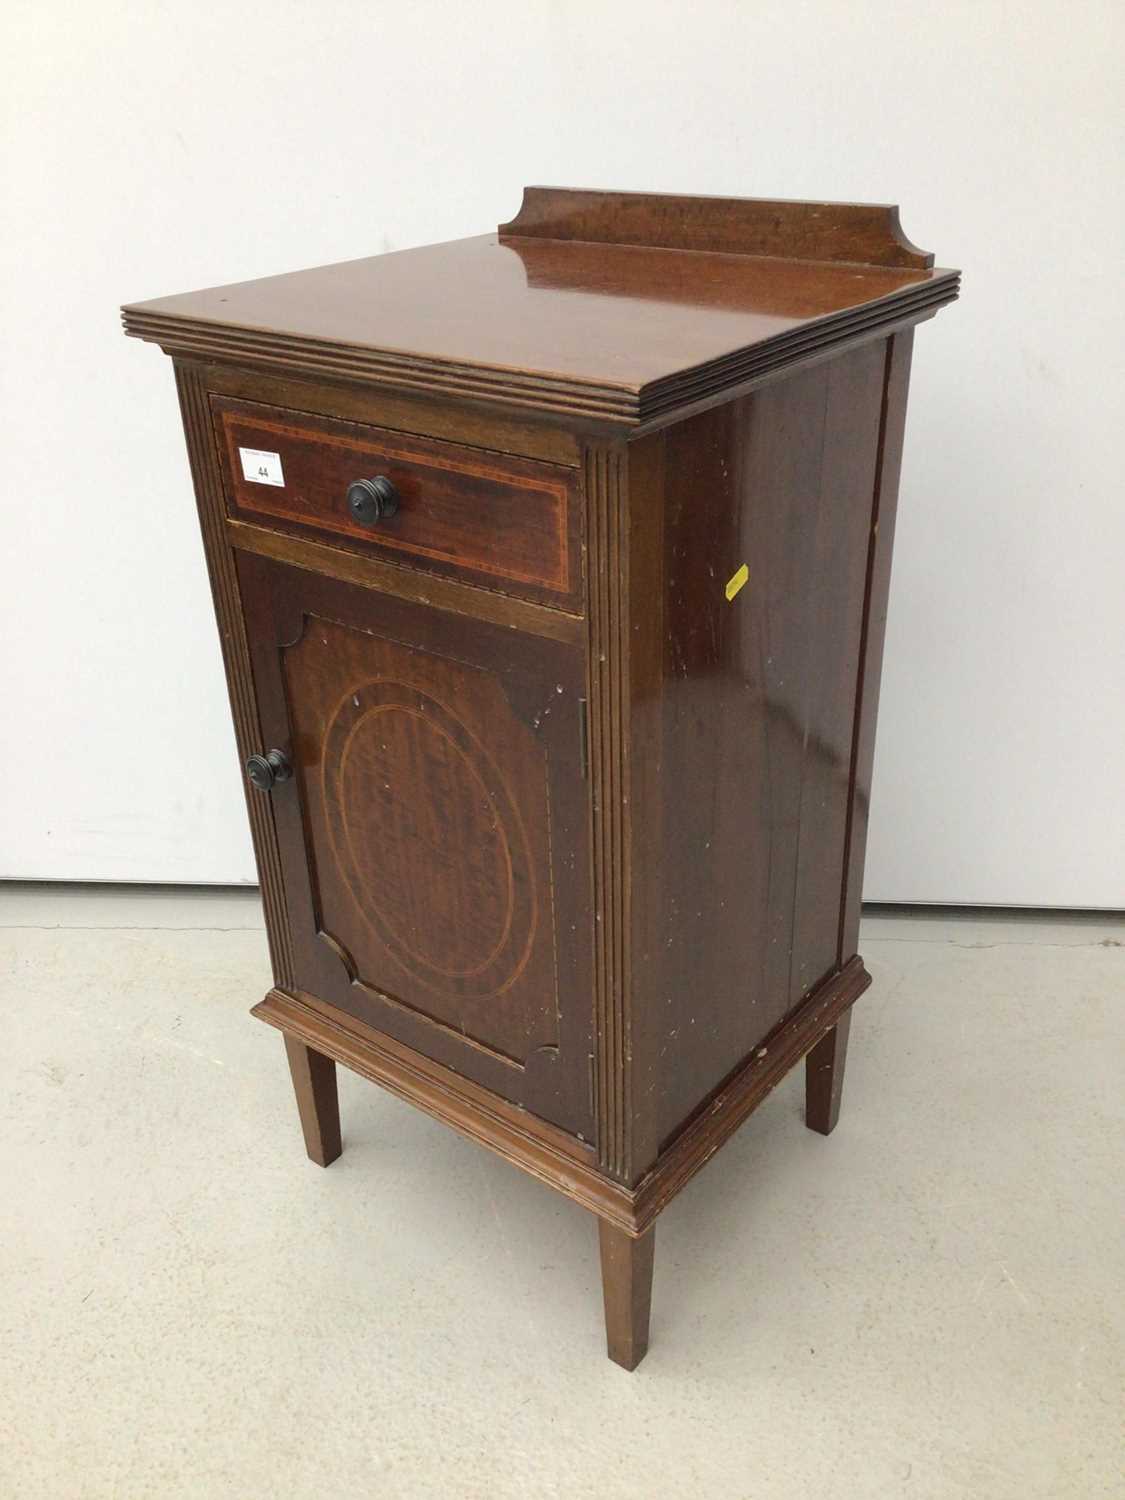 Lot 44 - Ewardian inlaid mahogany bedside cupboard with single drawer and panelled door below, 40cm wide x 78cm high